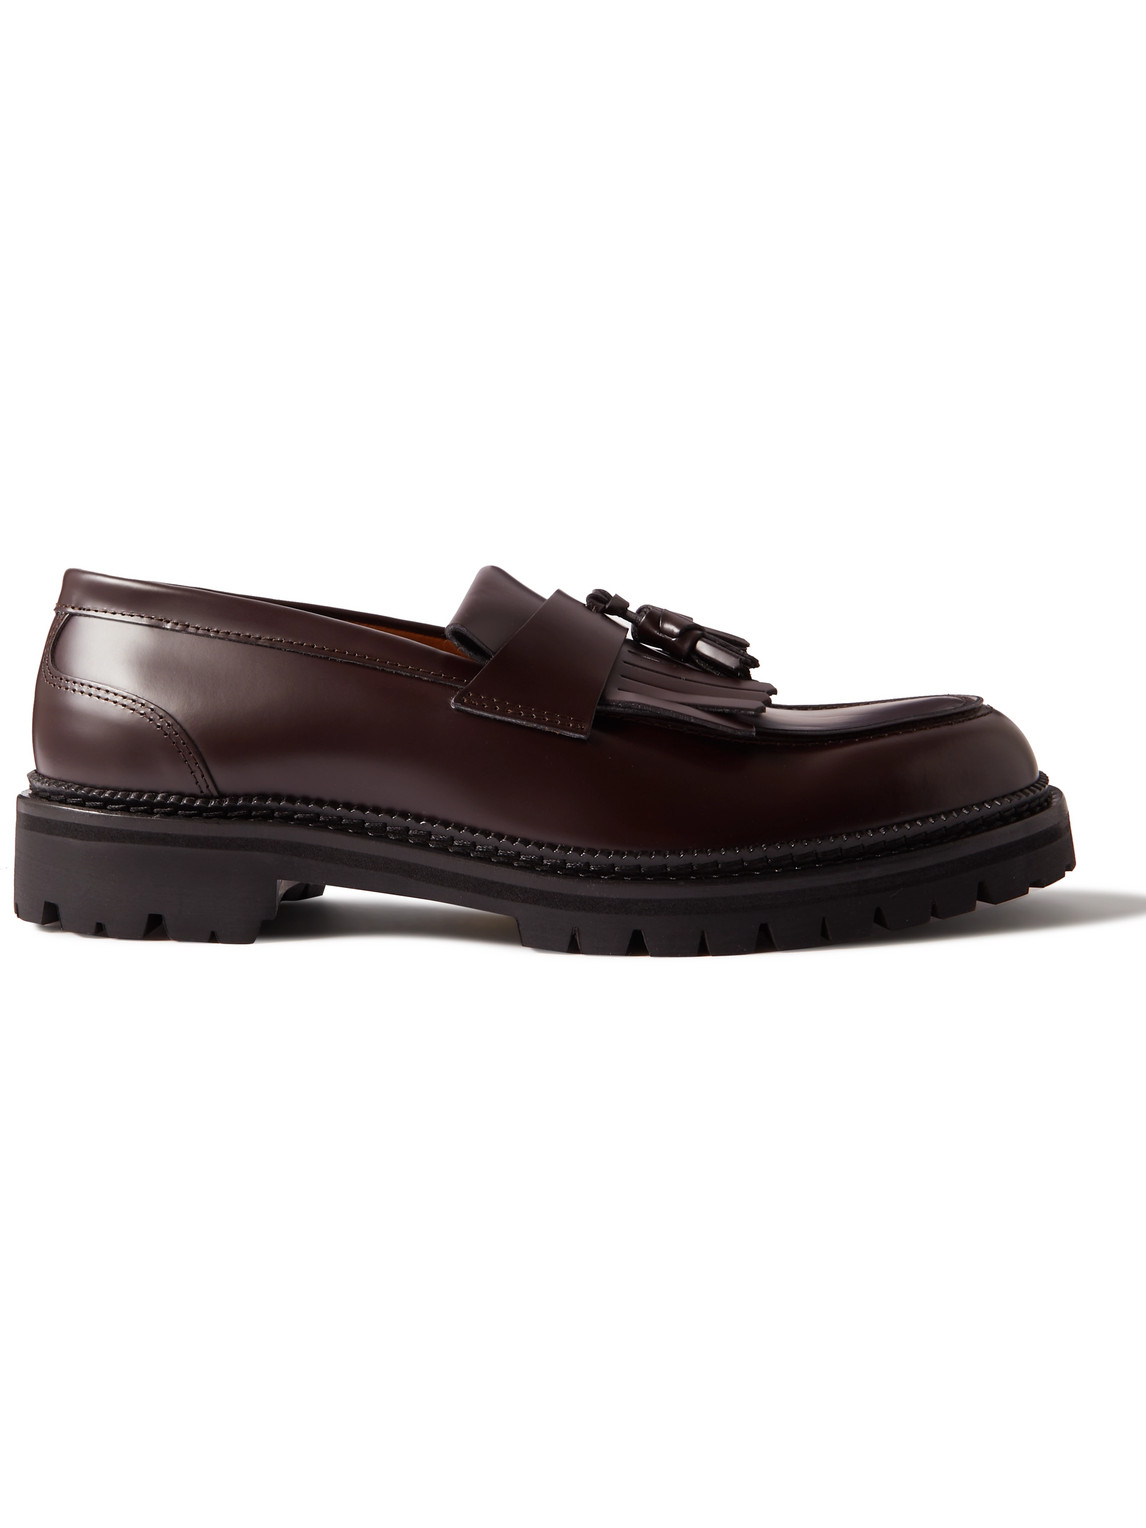 Mr P Jacques Fringed Tasselled Leather Loafers In Burgundy